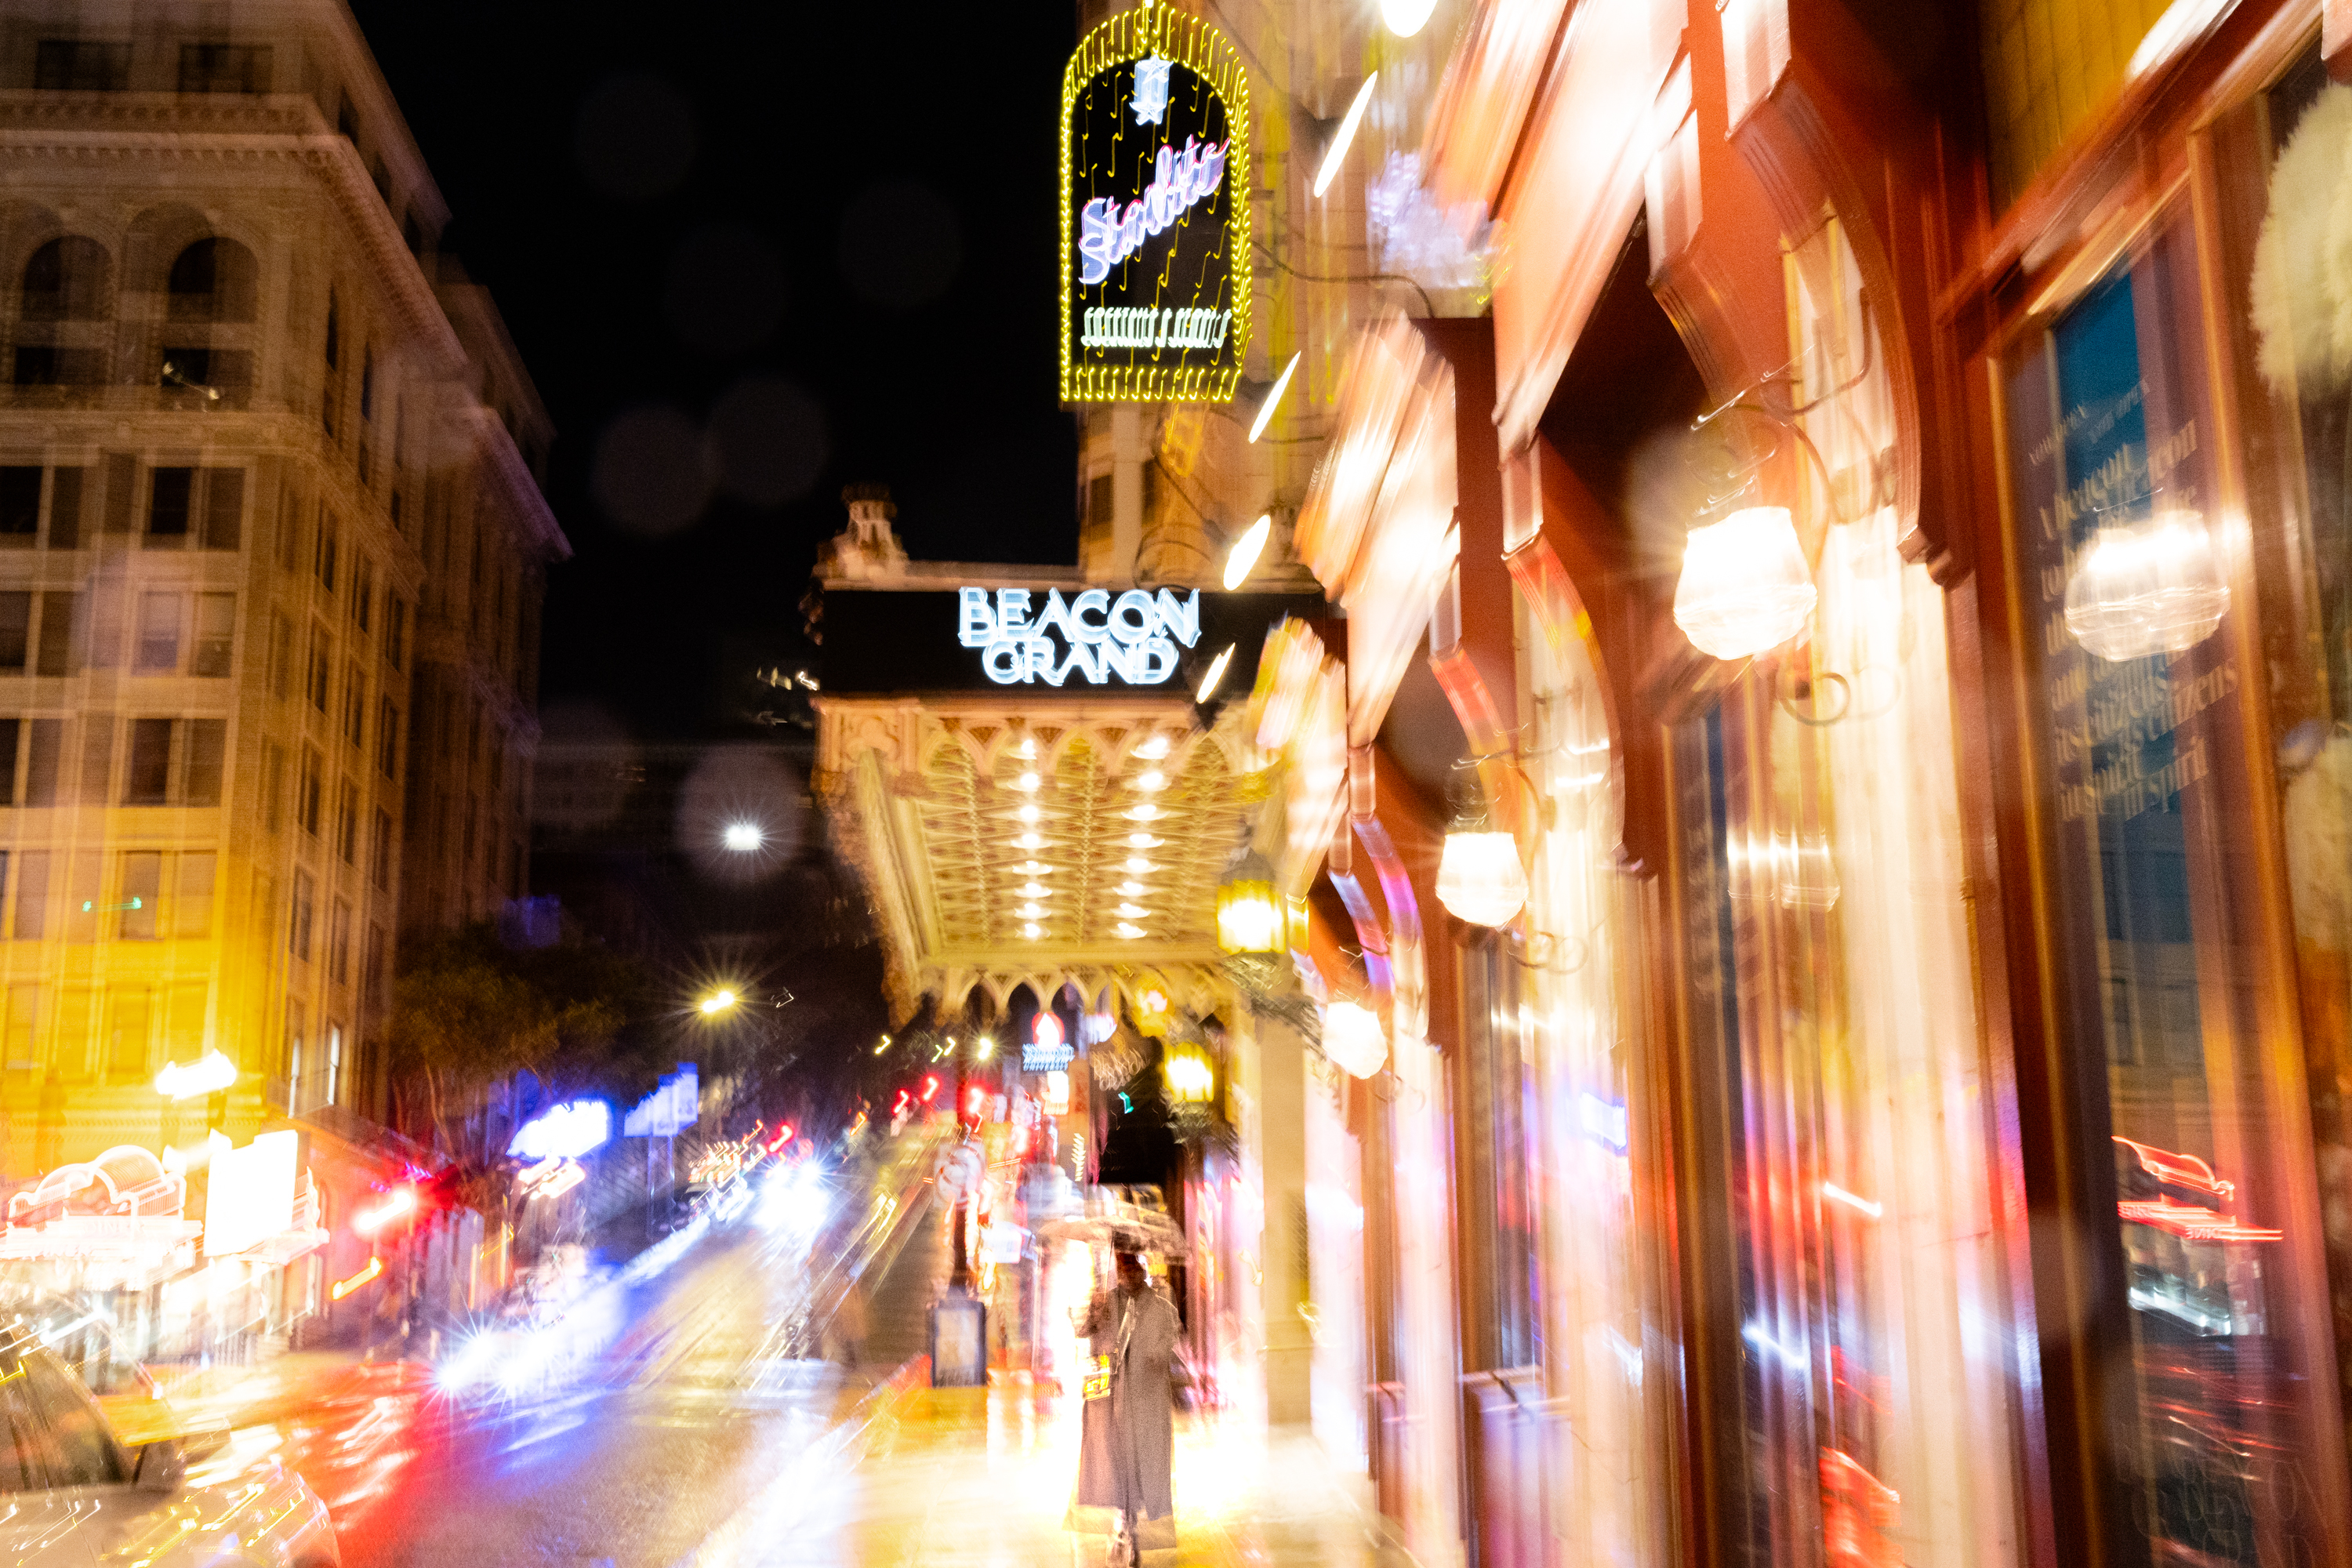 A blurry night scene with bright lights, a neon sign, and &quot;BEACON GRAND&quot; sign above an illuminated entrance.